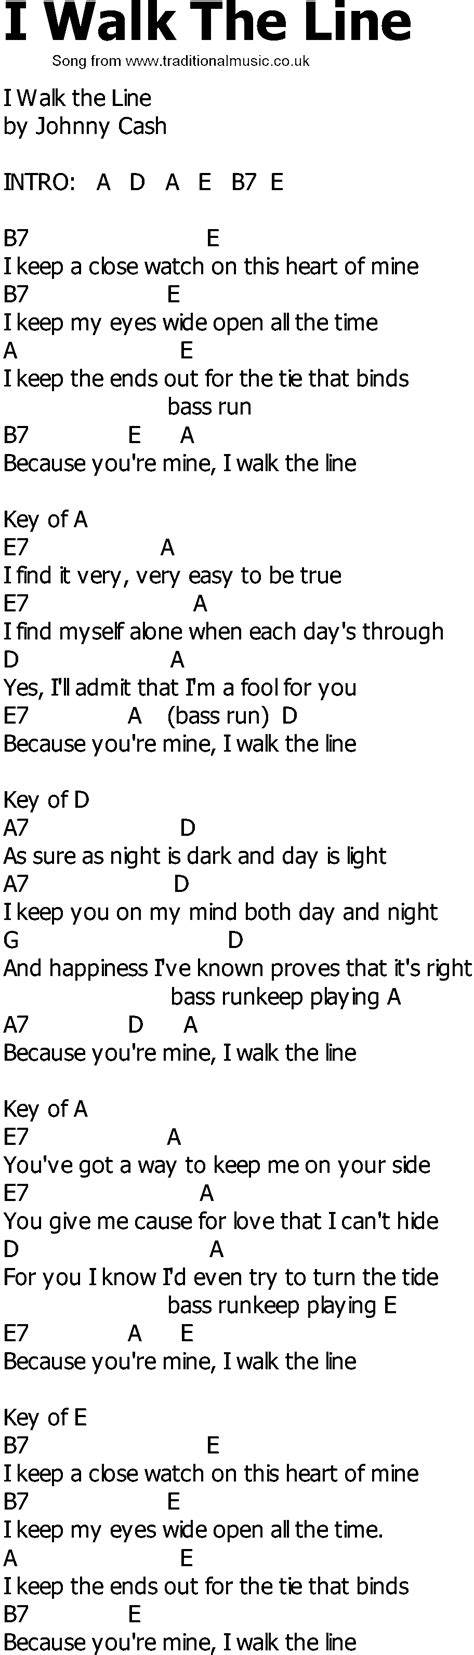 Old Country Song Lyrics With Chords I Walk The Line Guitarchords Playpiano Song Lyrics And